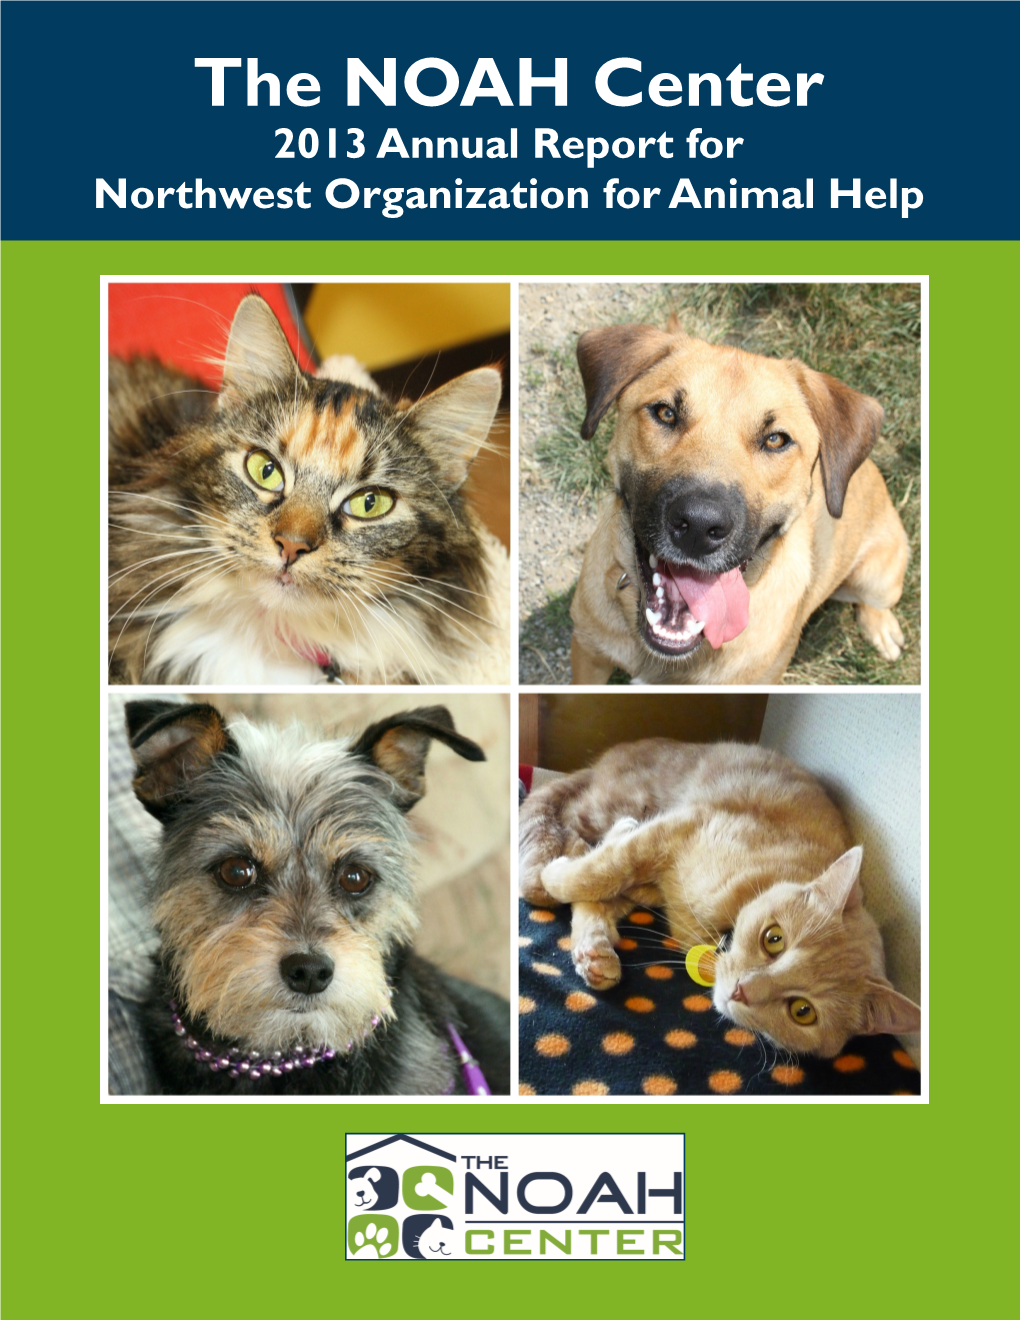 The NOAH Center 2013 Annual Report for Northwest Organization for Animal Help